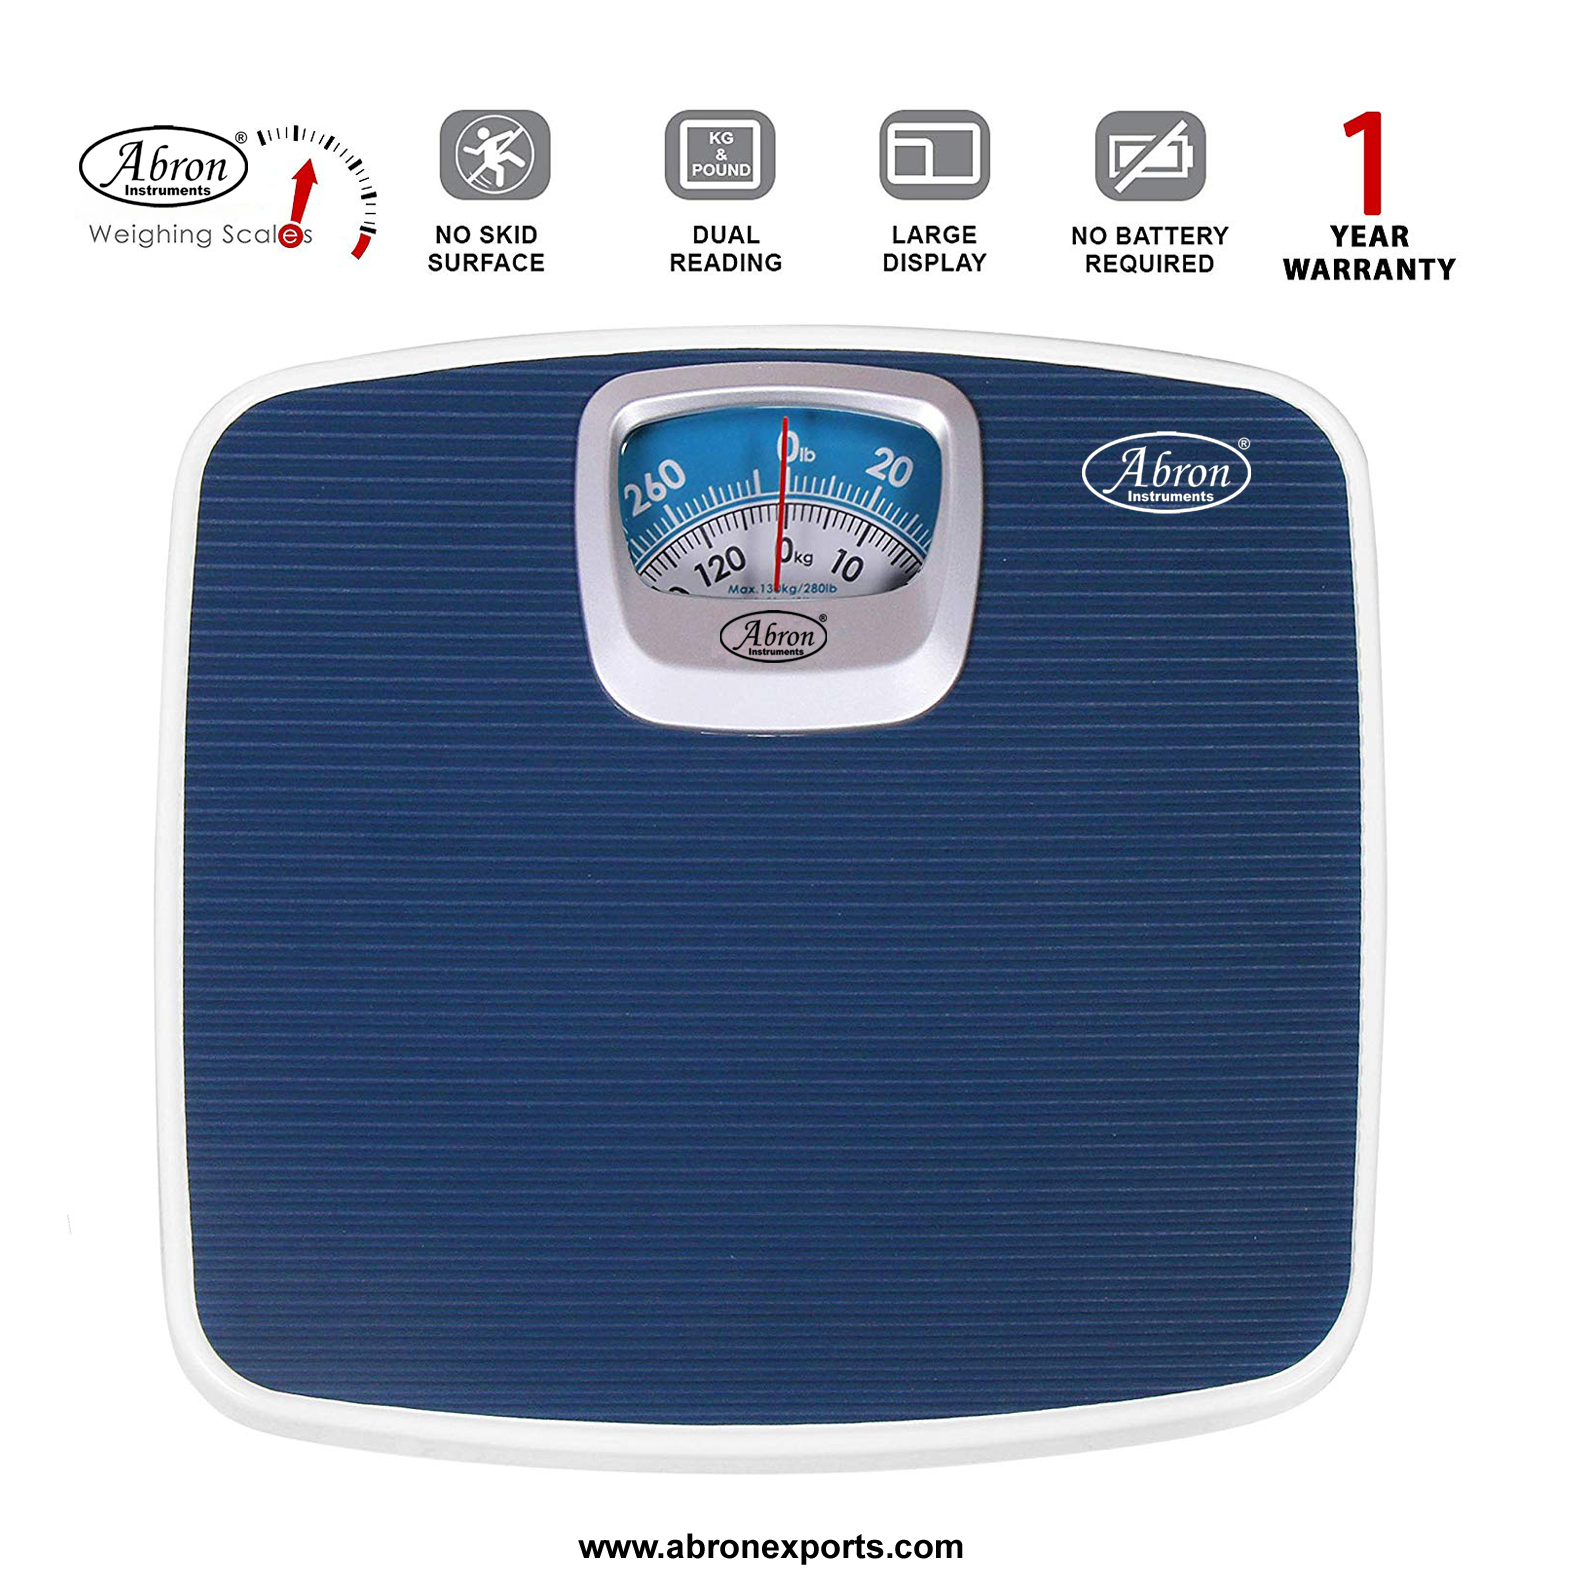 Balance Personal Digital BMI 125 kg x 500gm Metal body with Dial and spring inside ABM-3255PN